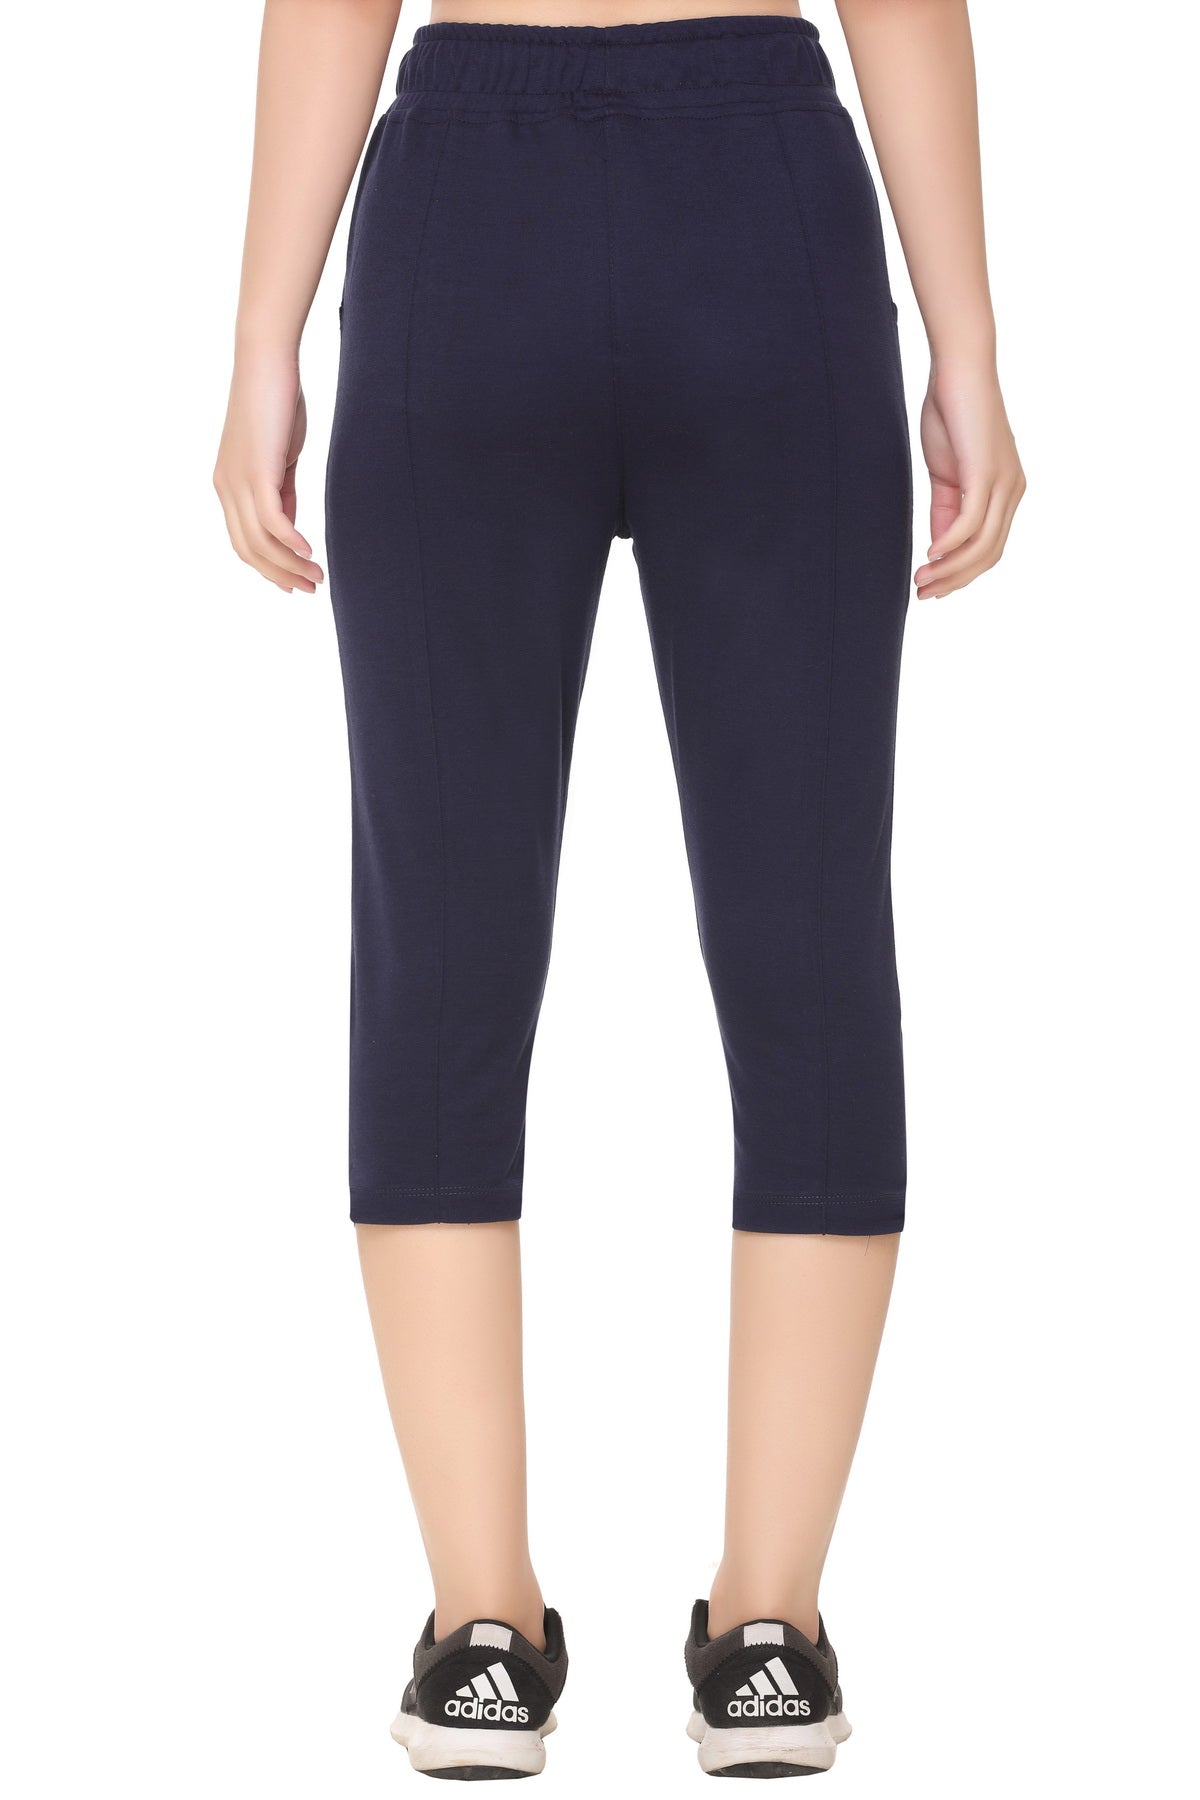 Stylish Imperial Blue Cotton Half Capris For Women online in India